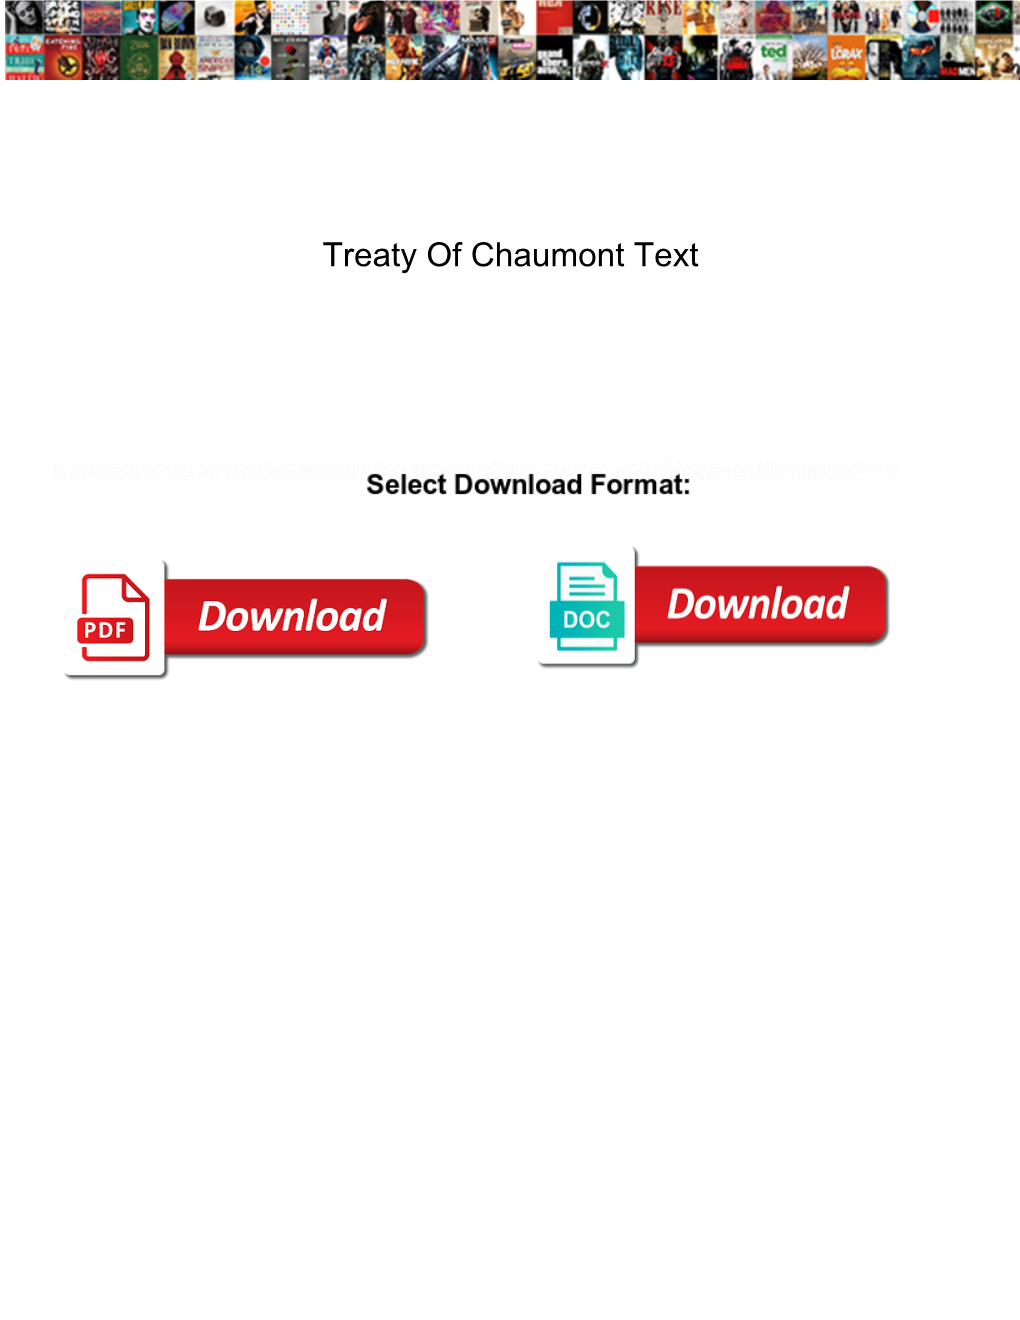 Treaty of Chaumont Text